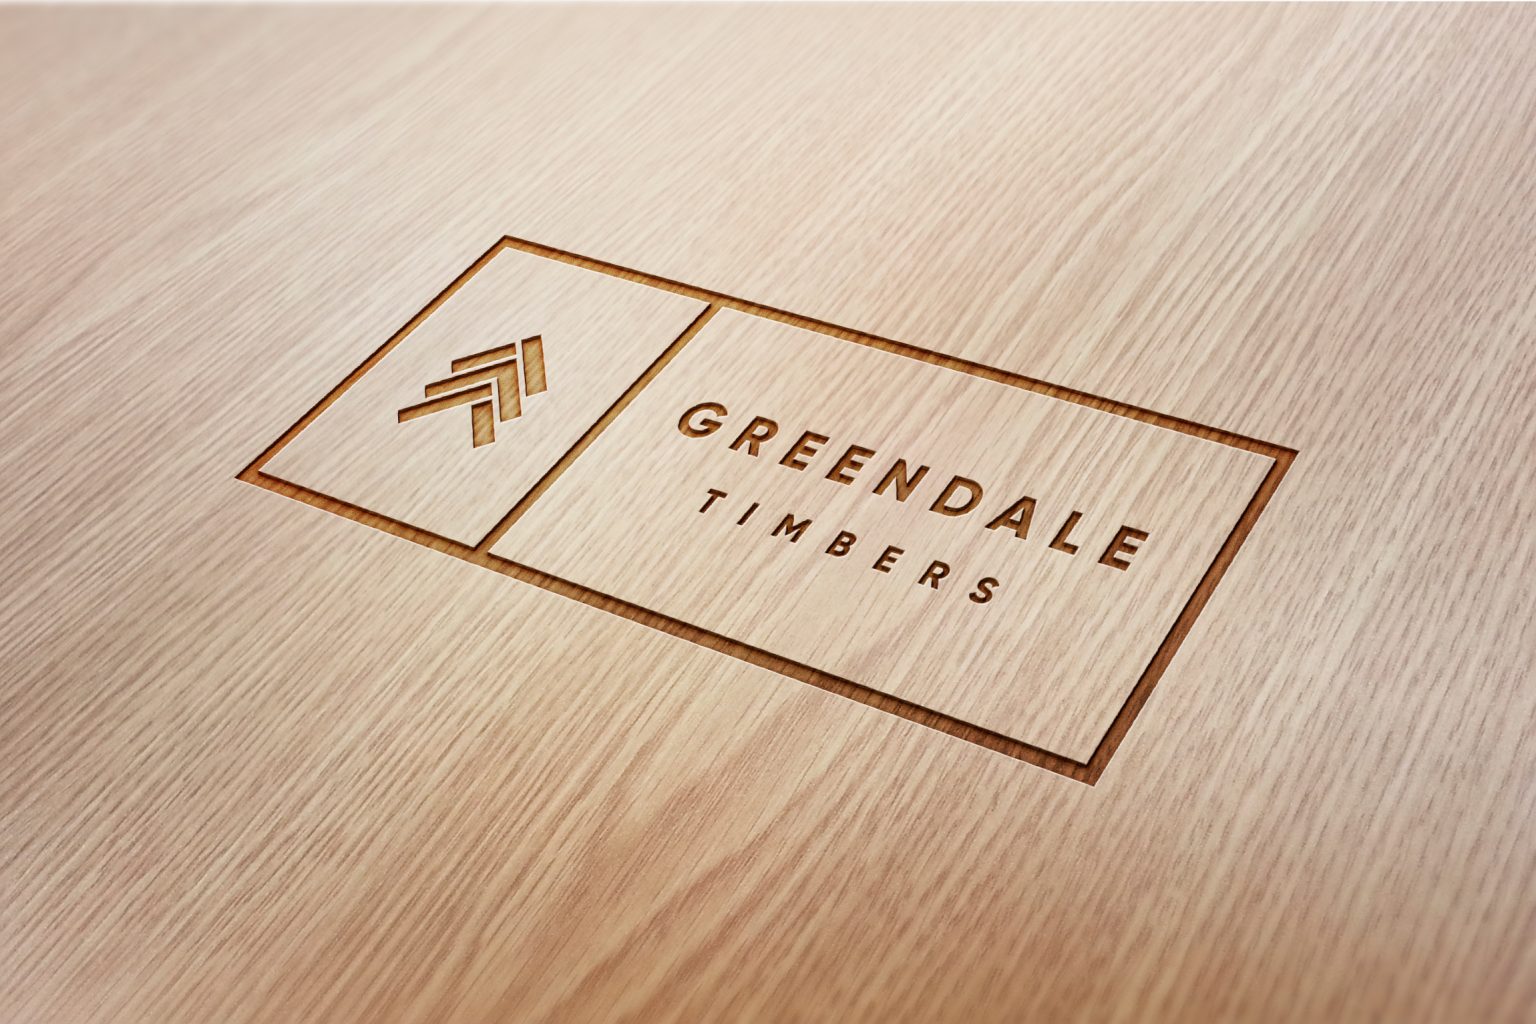 Greendale Timbers - Logo Design Manly